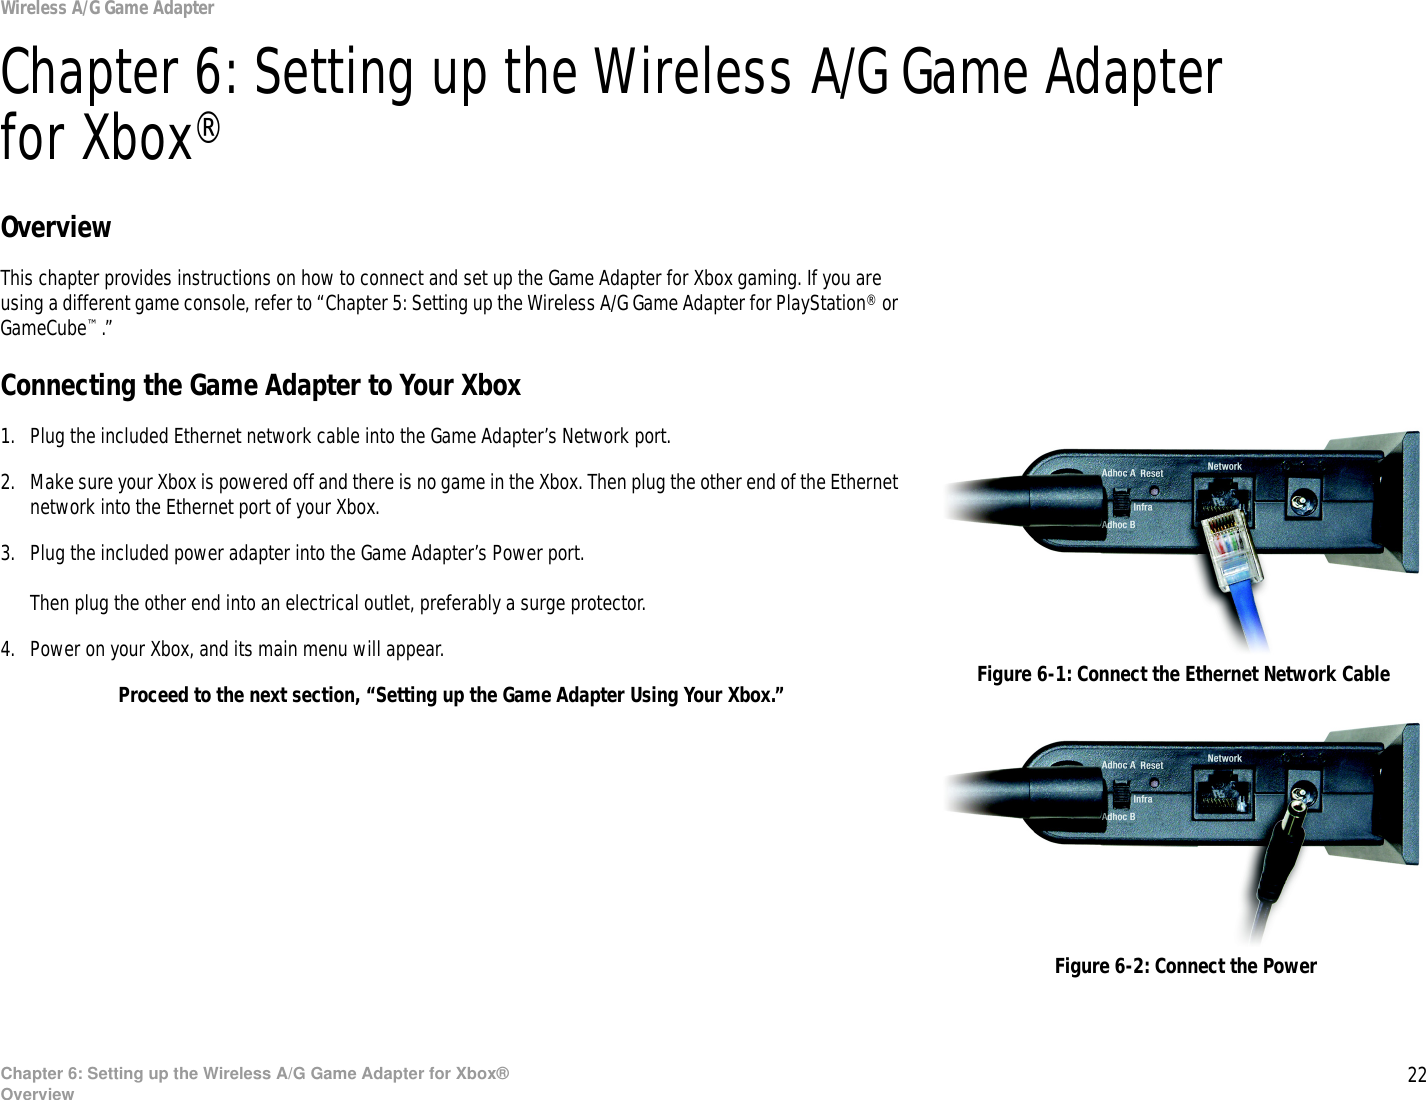 22Chapter 6: Setting up the Wireless A/G Game Adapter for Xbox®OverviewWireless A/G Game AdapterChapter 6: Setting up the Wireless A/G Game Adapter for Xbox®OverviewThis chapter provides instructions on how to connect and set up the Game Adapter for Xbox gaming. If you are using a different game console, refer to “Chapter 5: Setting up the Wireless A/G Game Adapter for PlayStation® or GameCube™.”Connecting the Game Adapter to Your Xbox1. Plug the included Ethernet network cable into the Game Adapter’s Network port.2. Make sure your Xbox is powered off and there is no game in the Xbox. Then plug the other end of the Ethernet network into the Ethernet port of your Xbox.3. Plug the included power adapter into the Game Adapter’s Power port.Then plug the other end into an electrical outlet, preferably a surge protector.4. Power on your Xbox, and its main menu will appear.Proceed to the next section, “Setting up the Game Adapter Using Your Xbox.” Figure 6-1: Connect the Ethernet Network CableFigure 6-2: Connect the Power